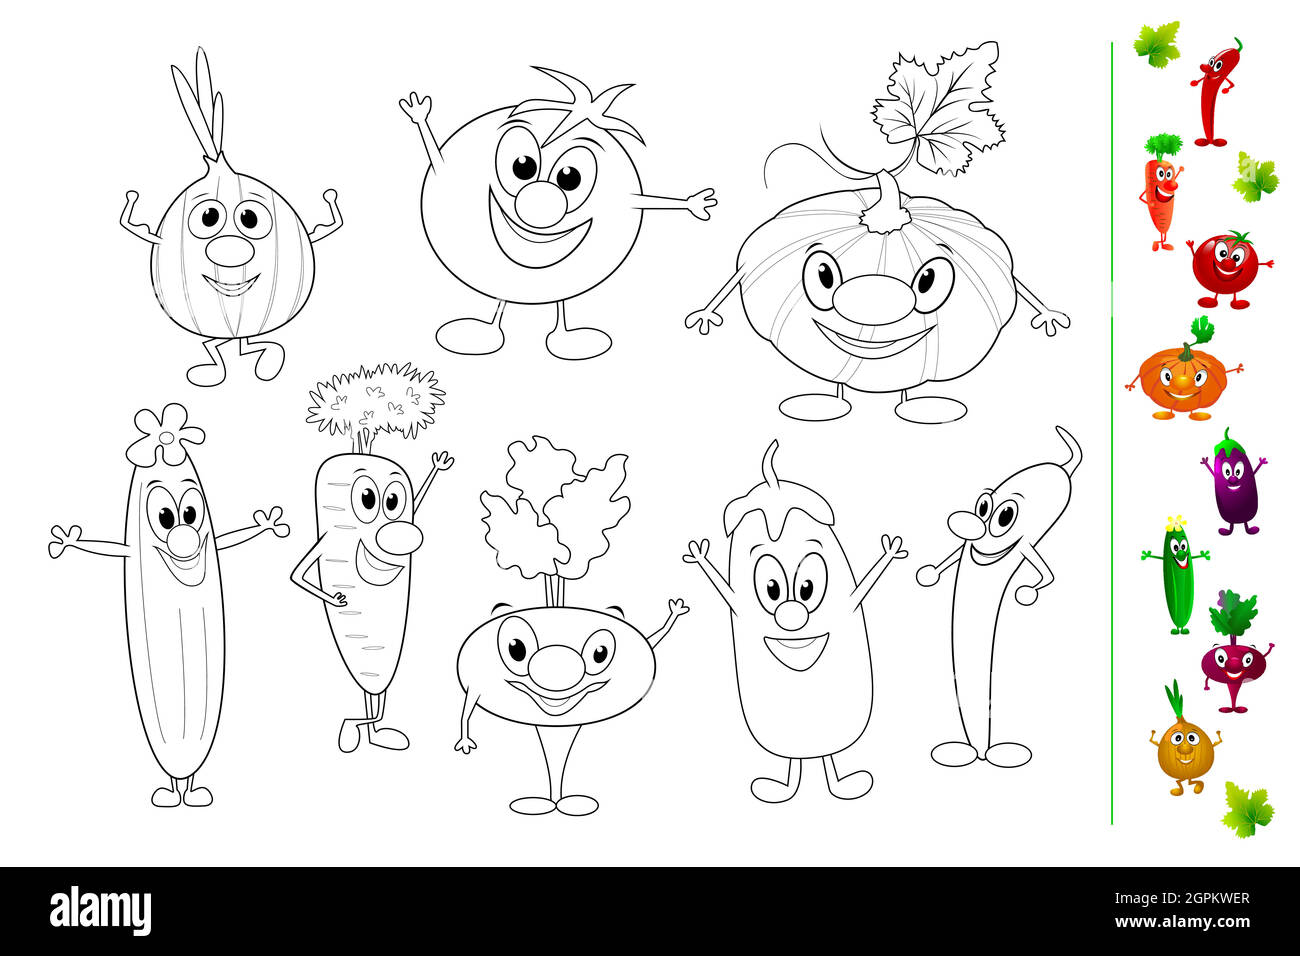 Cartoon Vegetables Coloring Book High Resolution Stock Photography ...